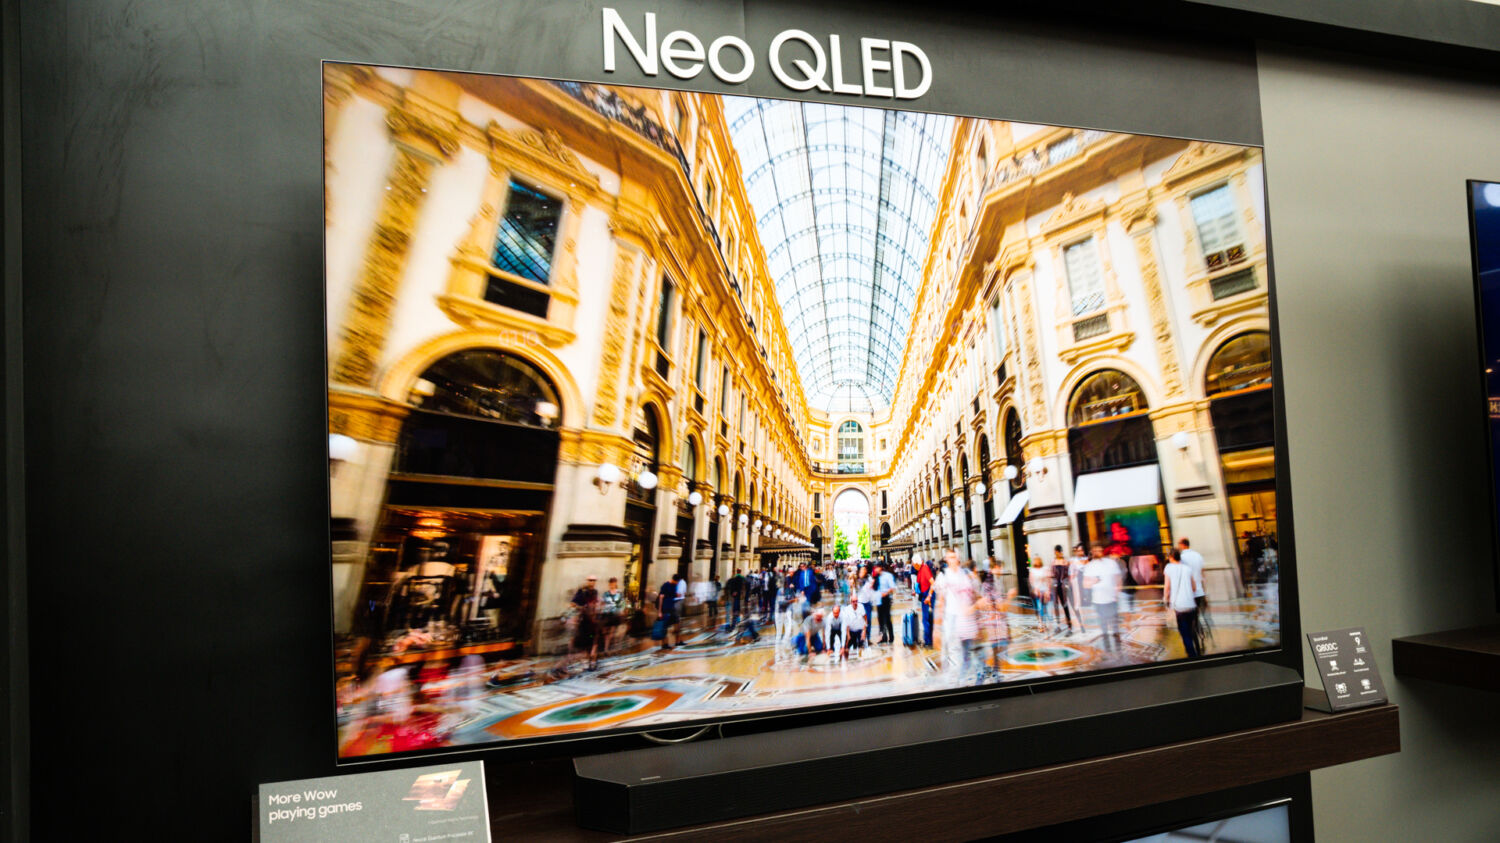 2023 Neo QLED - More Wow than ever